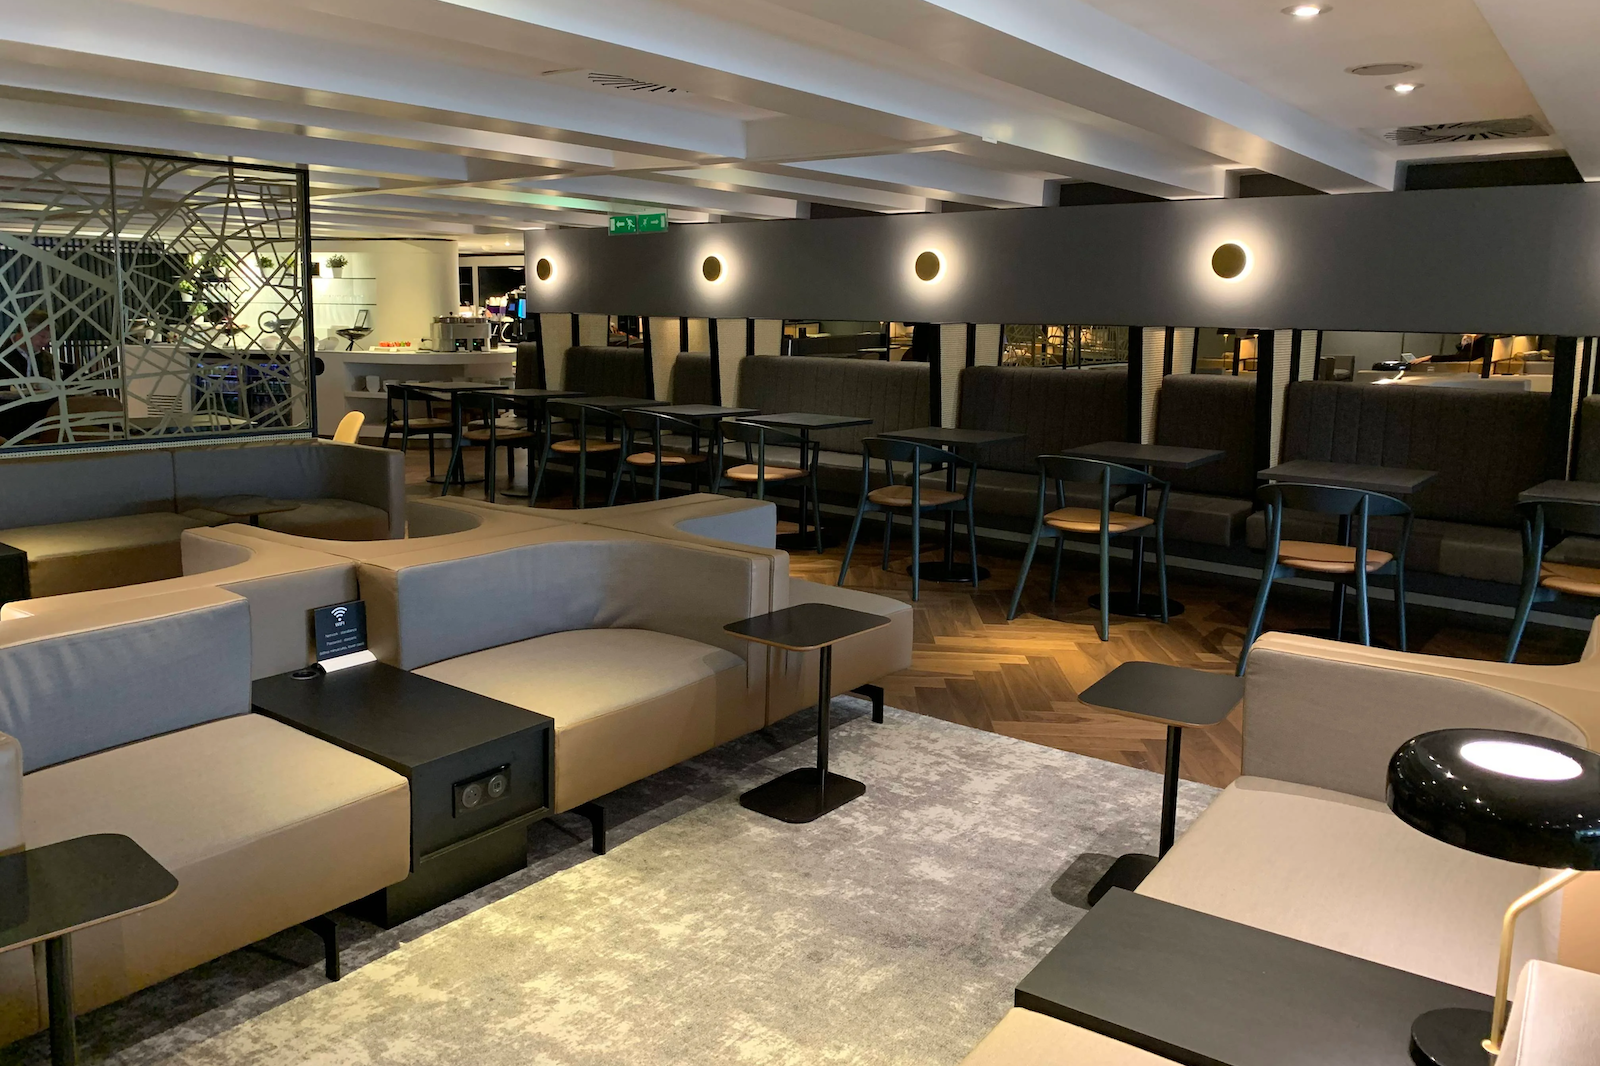 Sofas and tables inside the newly built airport lounge